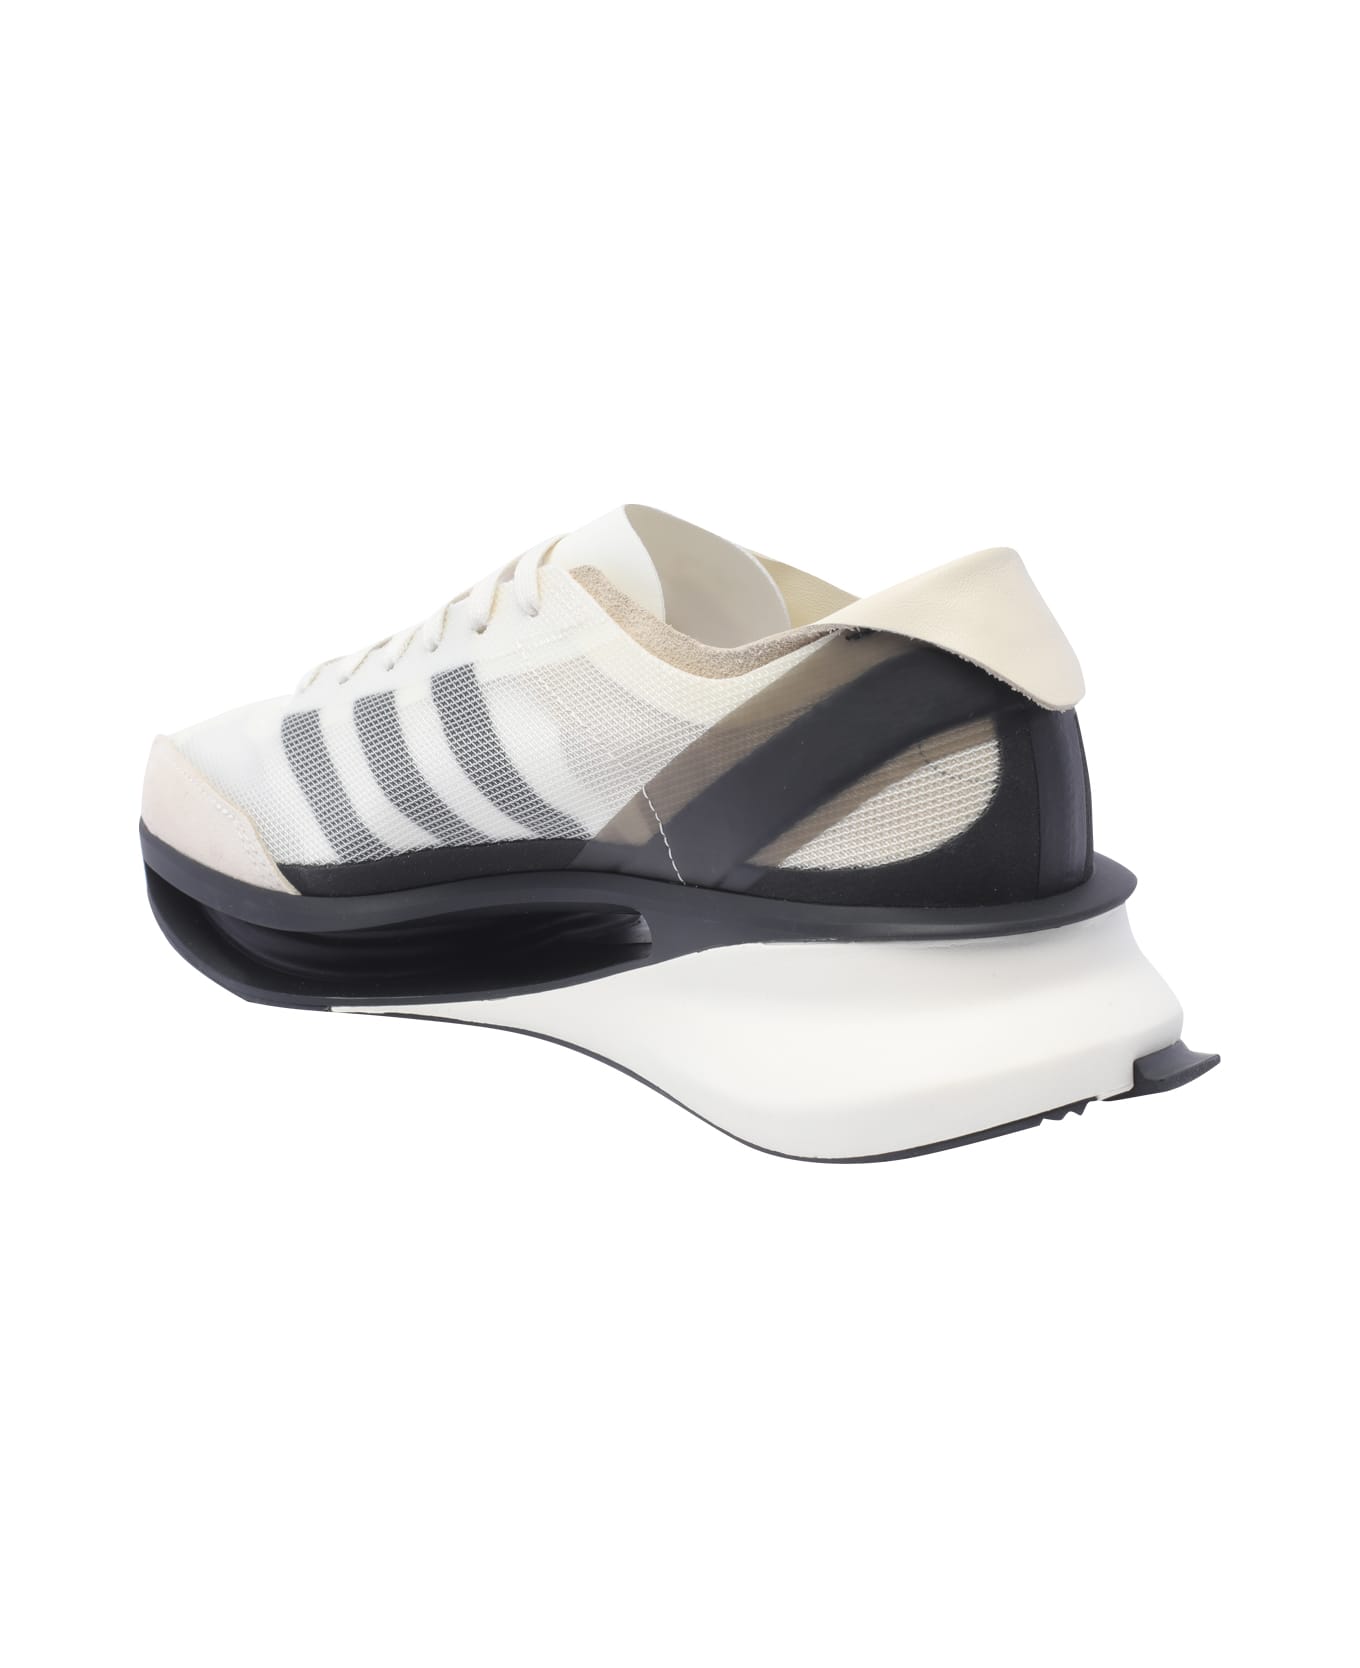 Y-3 S-gendo Sneakers - White スニーカー